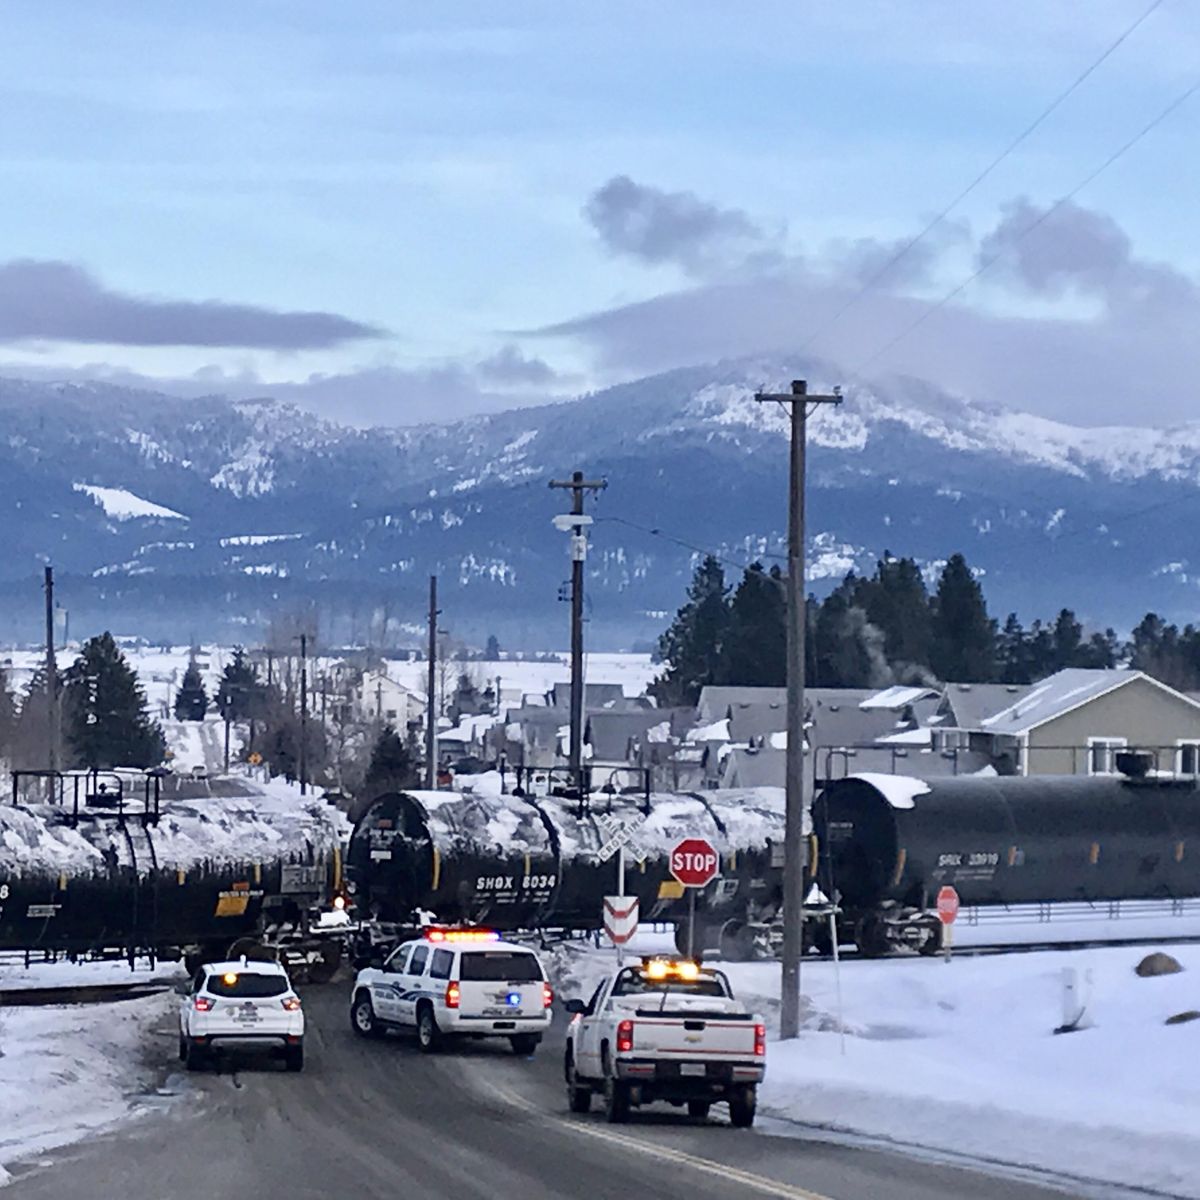 A teenage girl was killed Tuesday, Feb. 7, 2017 when the car she was in was struck by a train at Spokane Street in Post Falls. (Kathy Plonka / The Spokesman-Review)